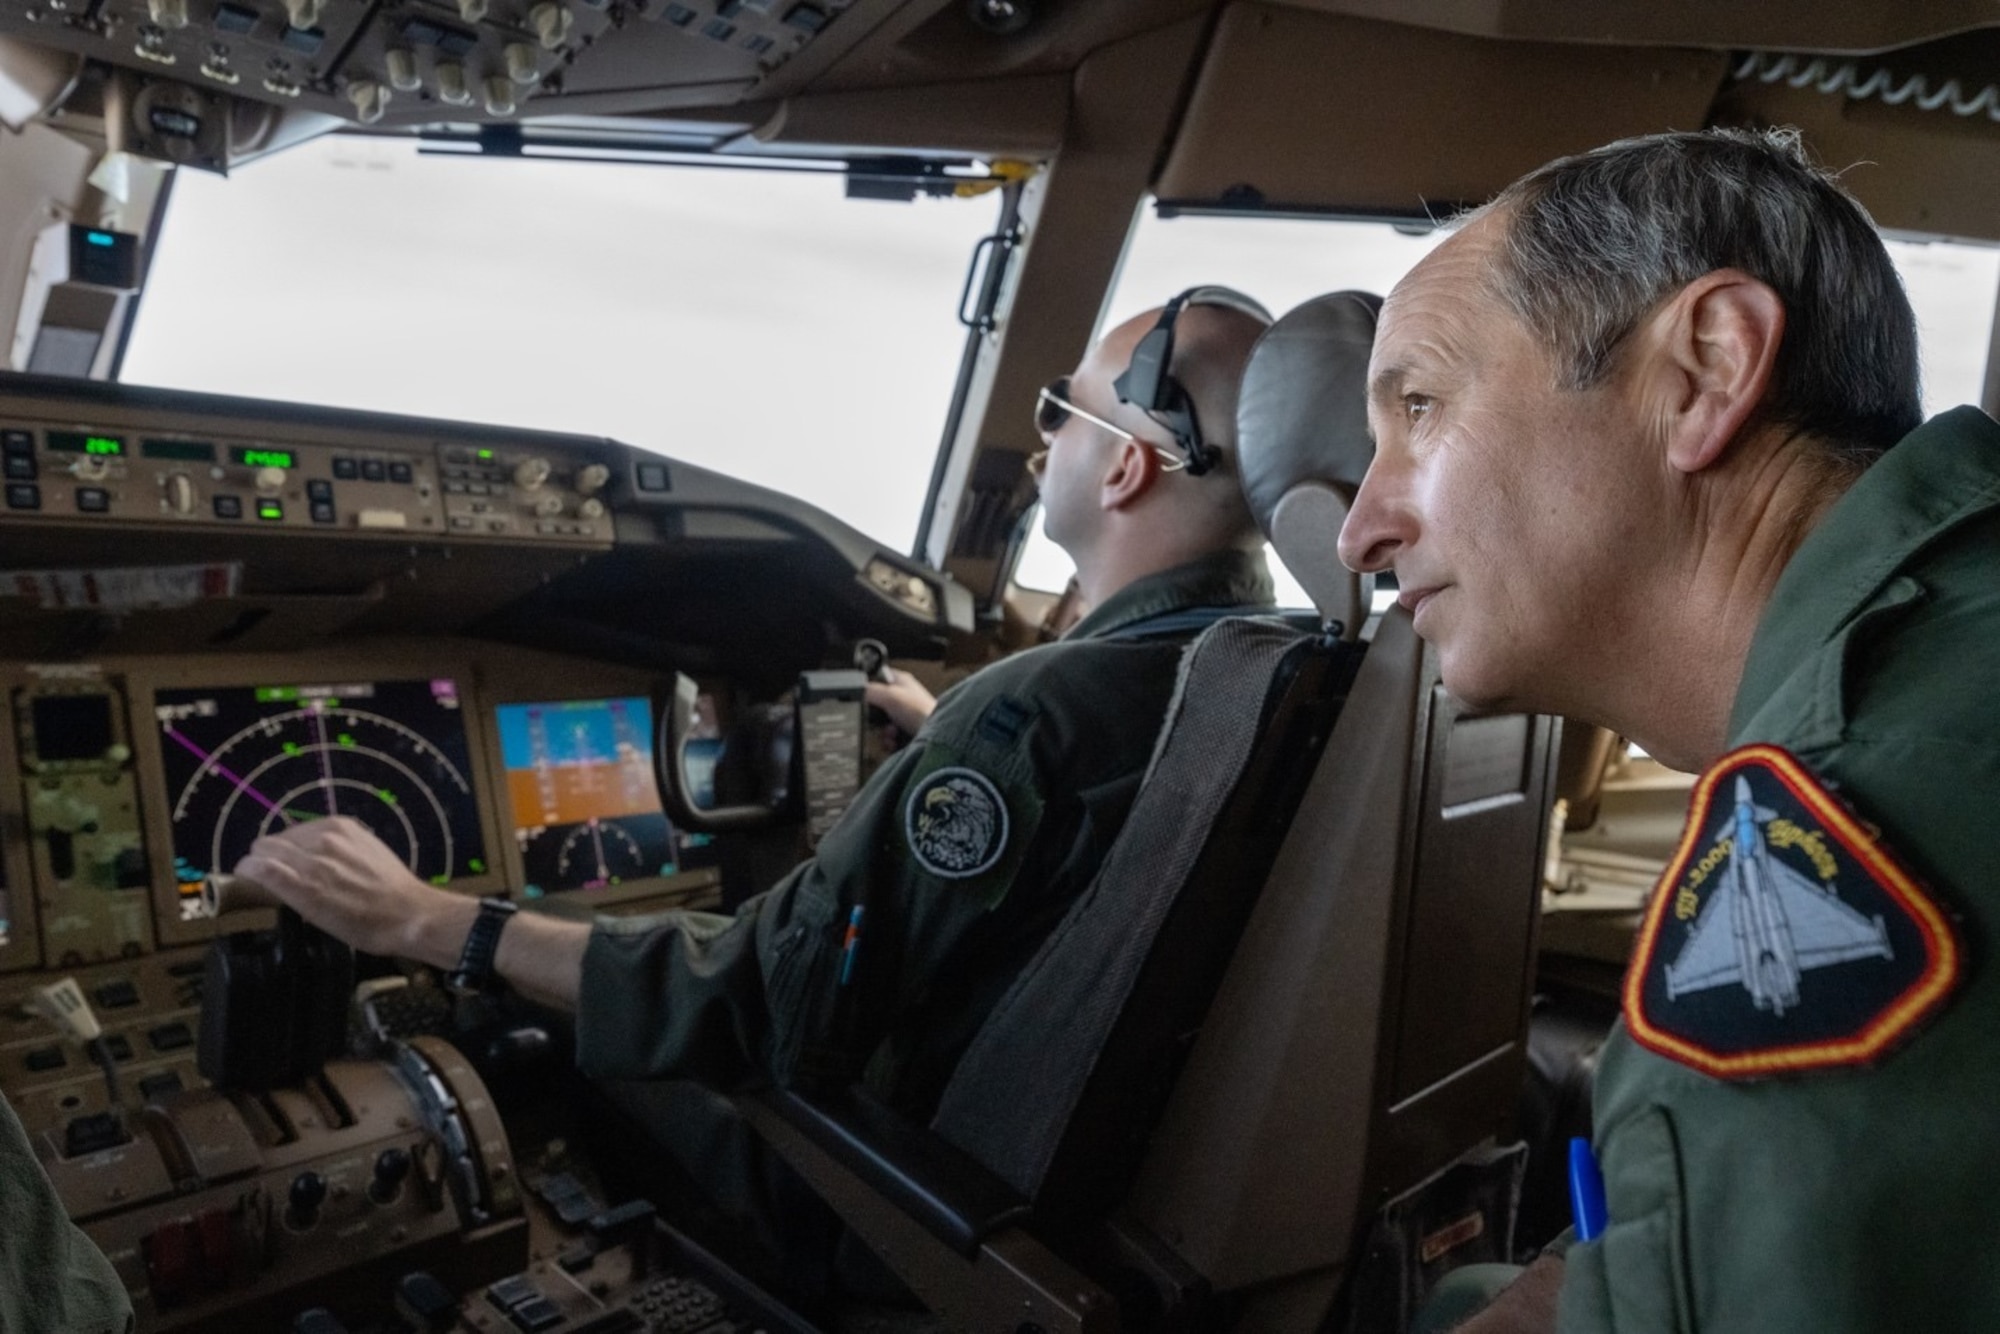 Morón Air Base commander, Spanish Air Force Col. Enrique Fernandez Ambel, observes as U.S. Air Force Capt. Steven Strickland, 344th Air Refueling Squadron KC-46A Pegasus instructor pilot, approaches to receive fuel during an orientation flight April 18, 2022. Spanish commanders joined the flight to familiarize themselves with U.S. tanker operations and witness the first-ever Pegasus refueling of an international aircraft, a Spanish EF-18 Hornet, also known in Spain as a C-15. (U.S. Air Force photo by Staff Sgt. Nathan Eckert)